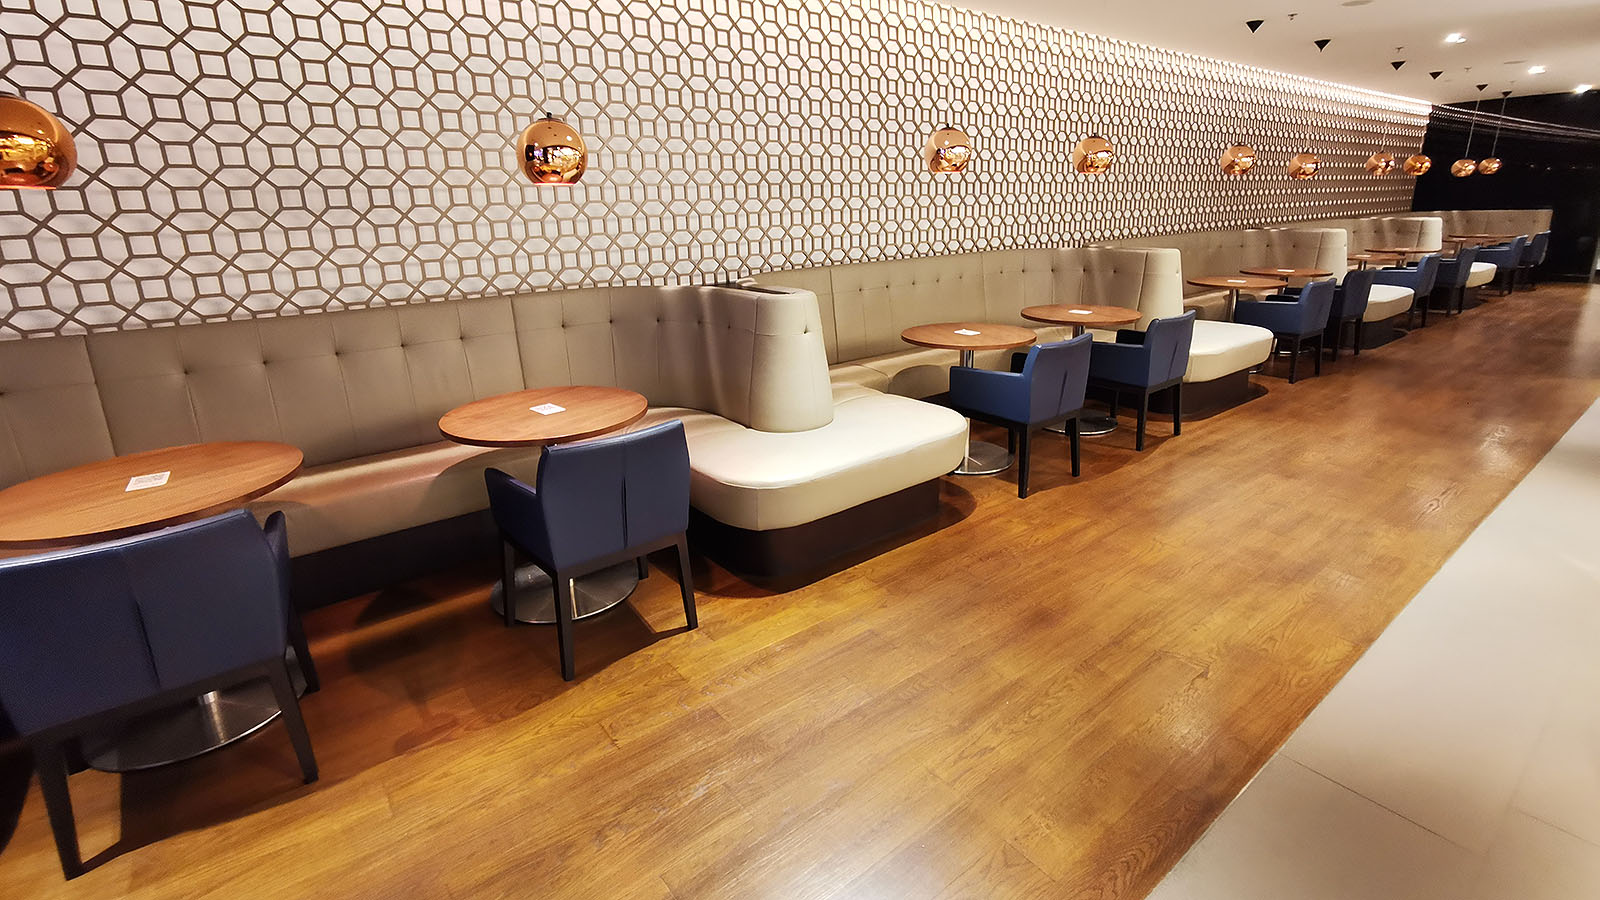 Dining tables at the British Airways Lounge, Singapore